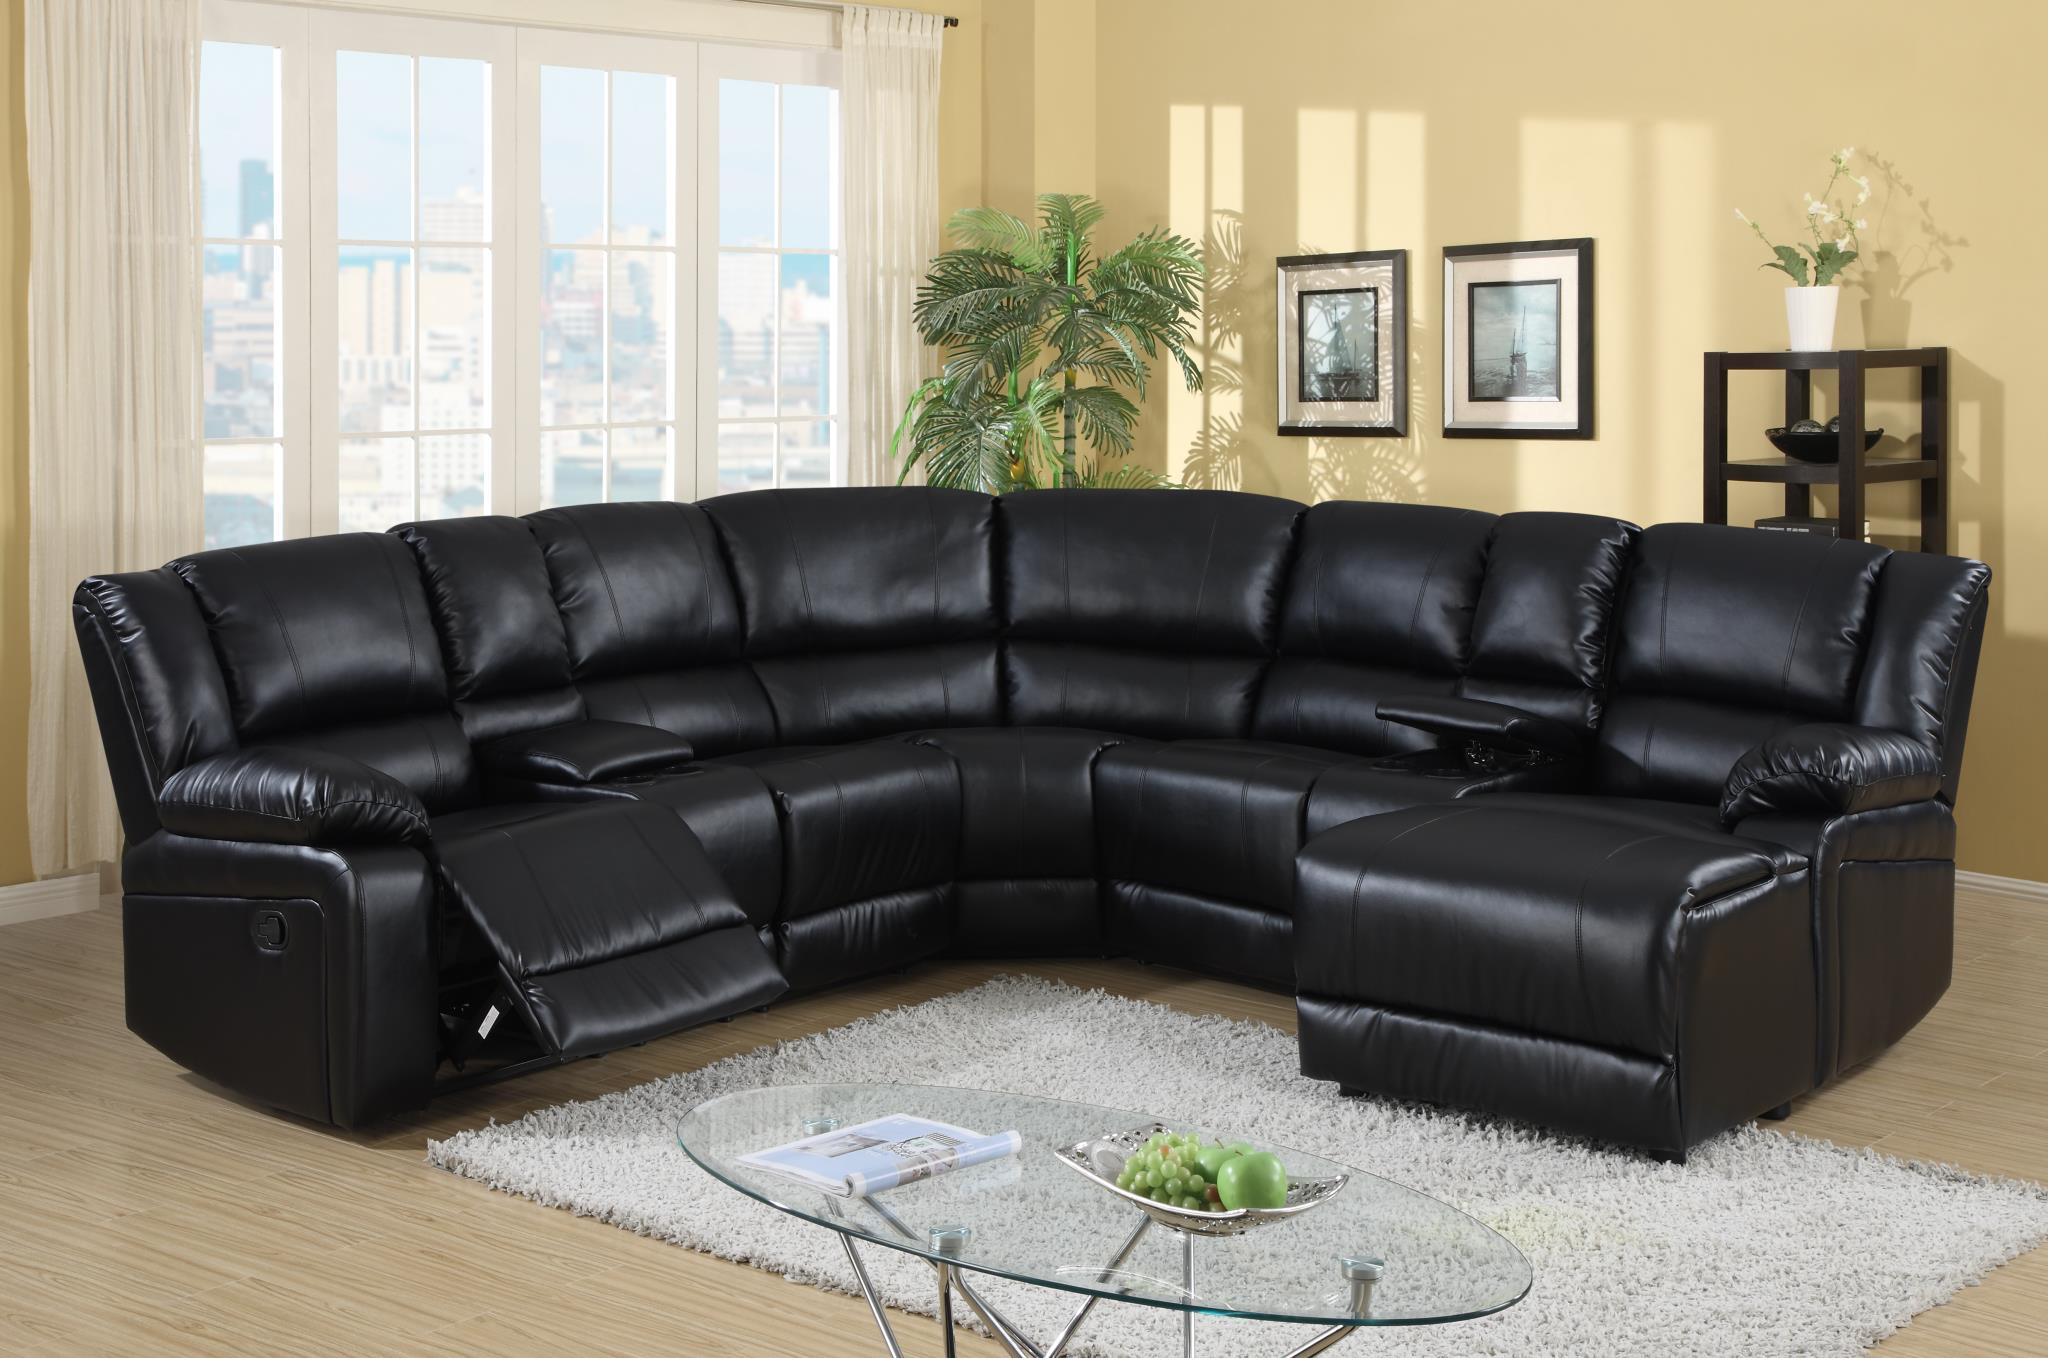 Traditional Sectional Sofa Cadence 1095-BK in Black Leatherette